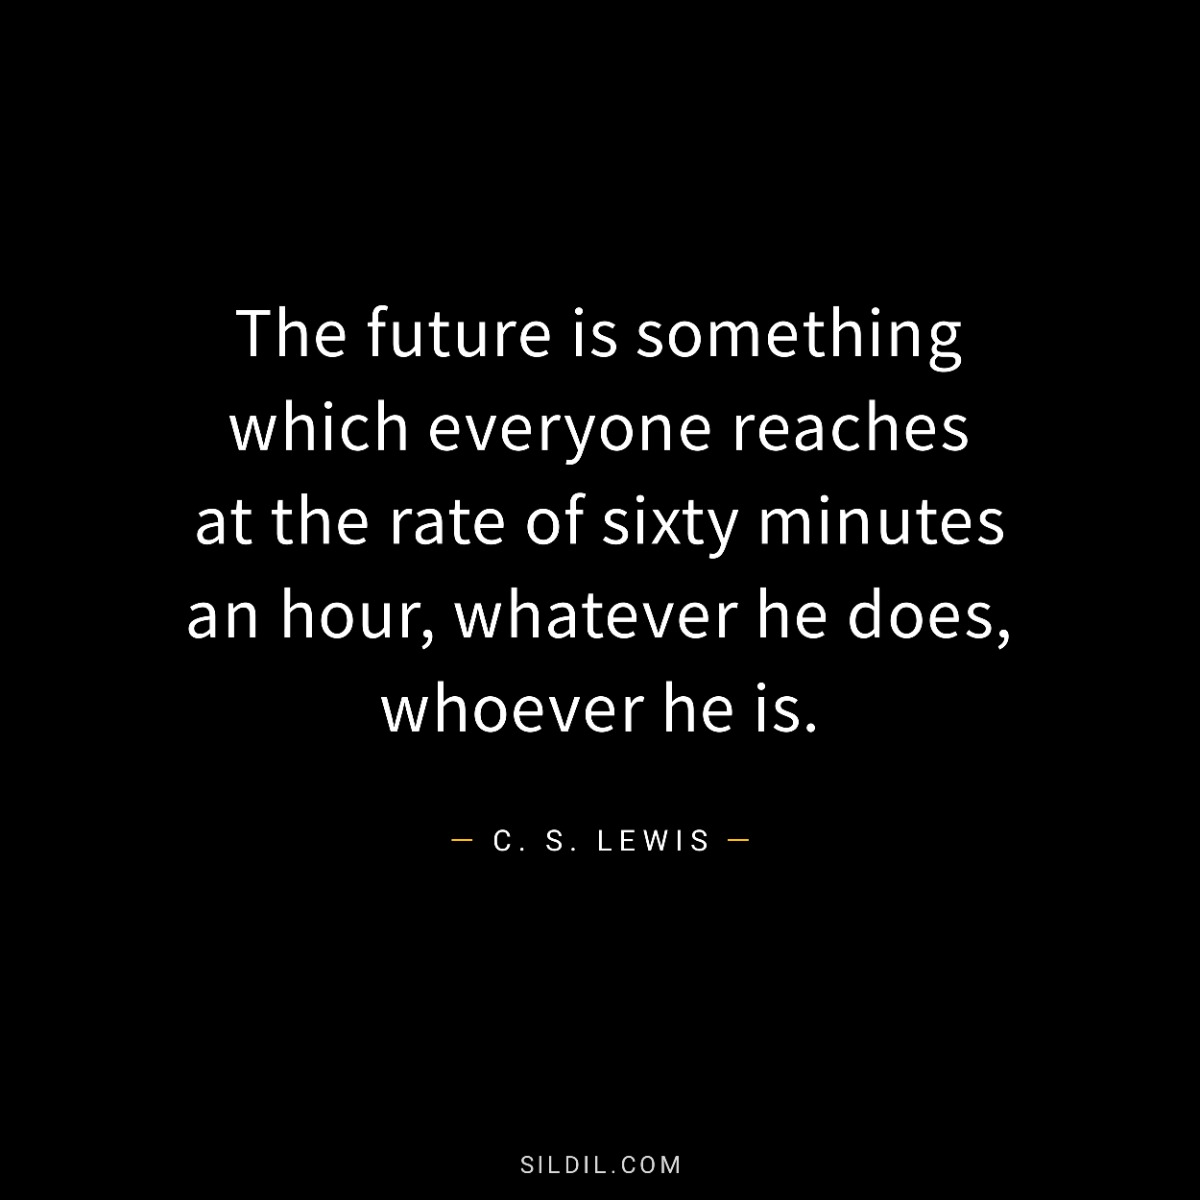 The future is something which everyone reaches at the rate of sixty minutes an hour, whatever he does, whoever he is.